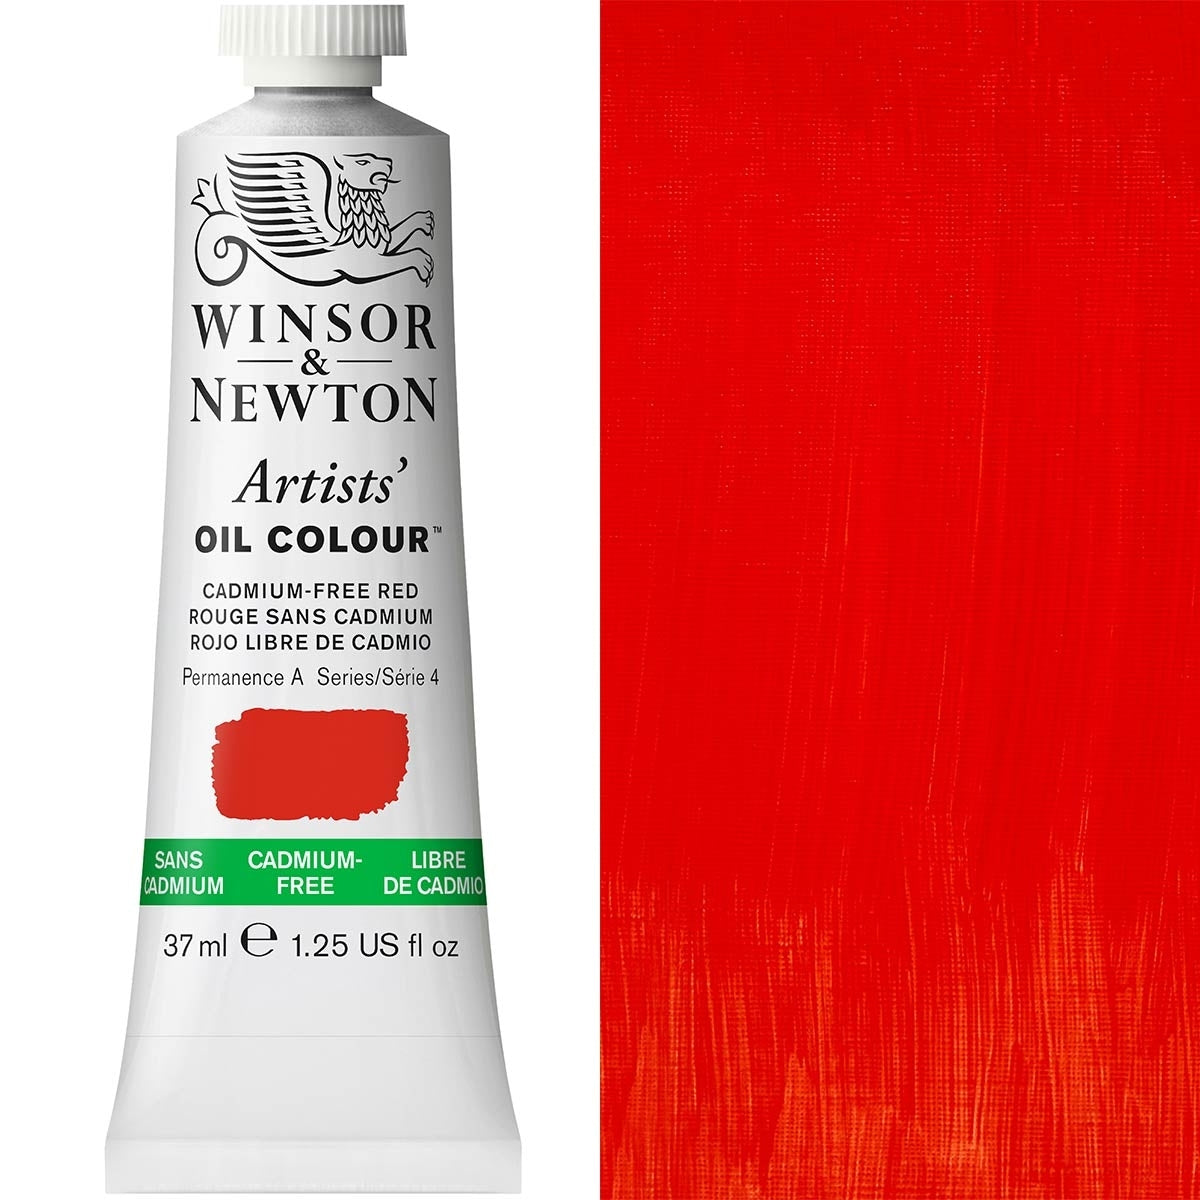 Winsor and Newton - Artists' Oil Colour - 37ml - Cad Free Red